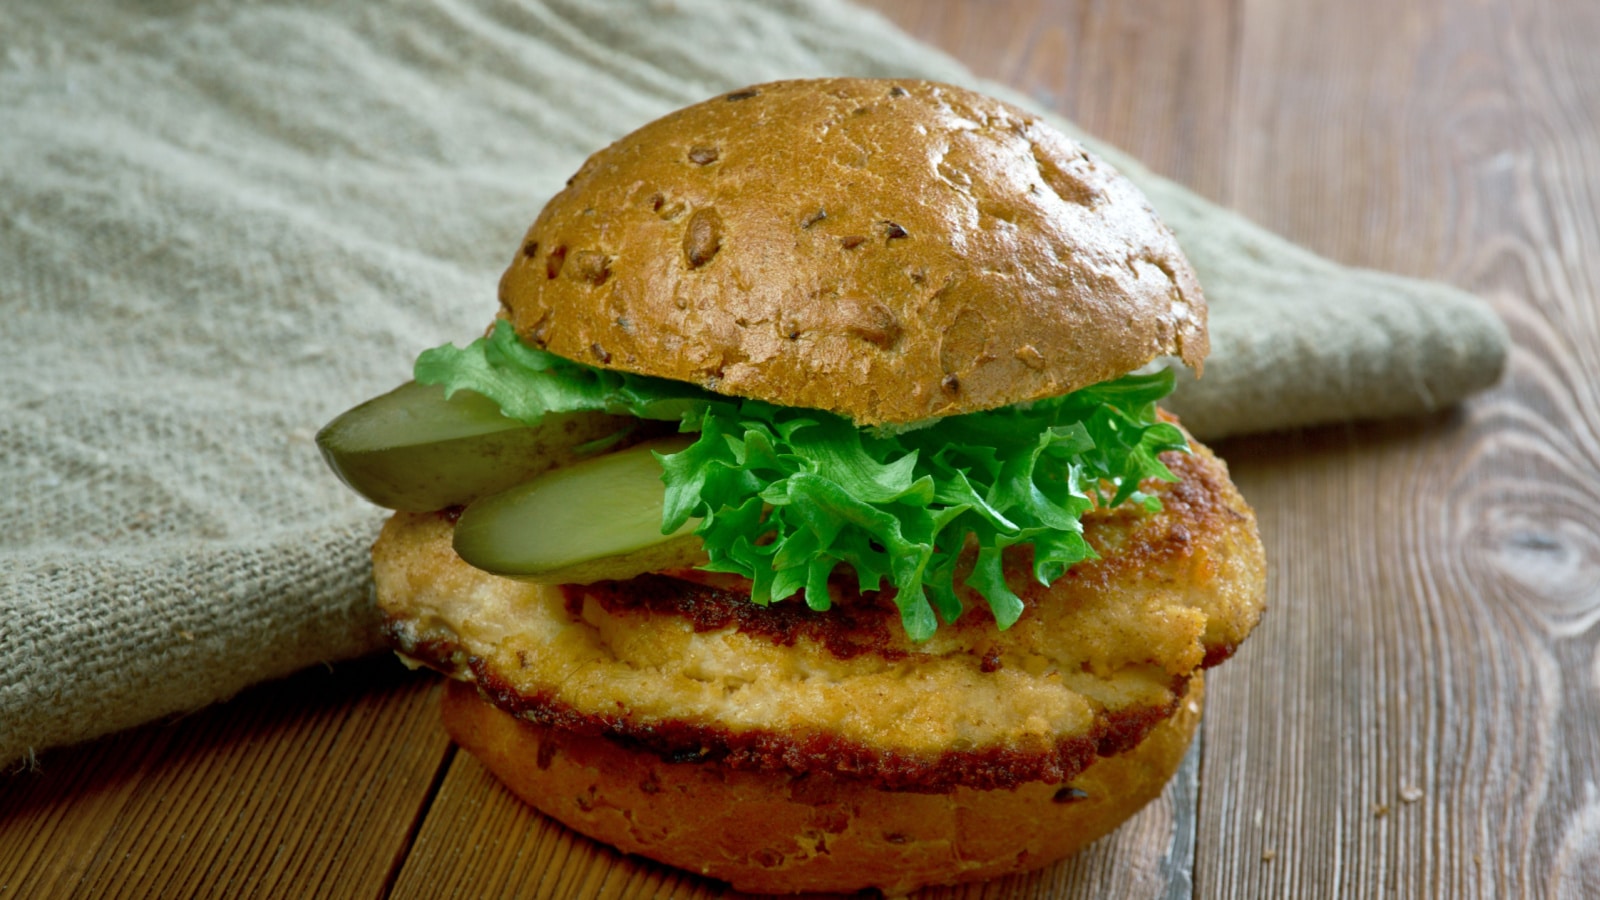 Traditional Indiana Pork tenderloin sandwich similar to the Wiener Schnitzel and is popular in the Midwest region of the United States,